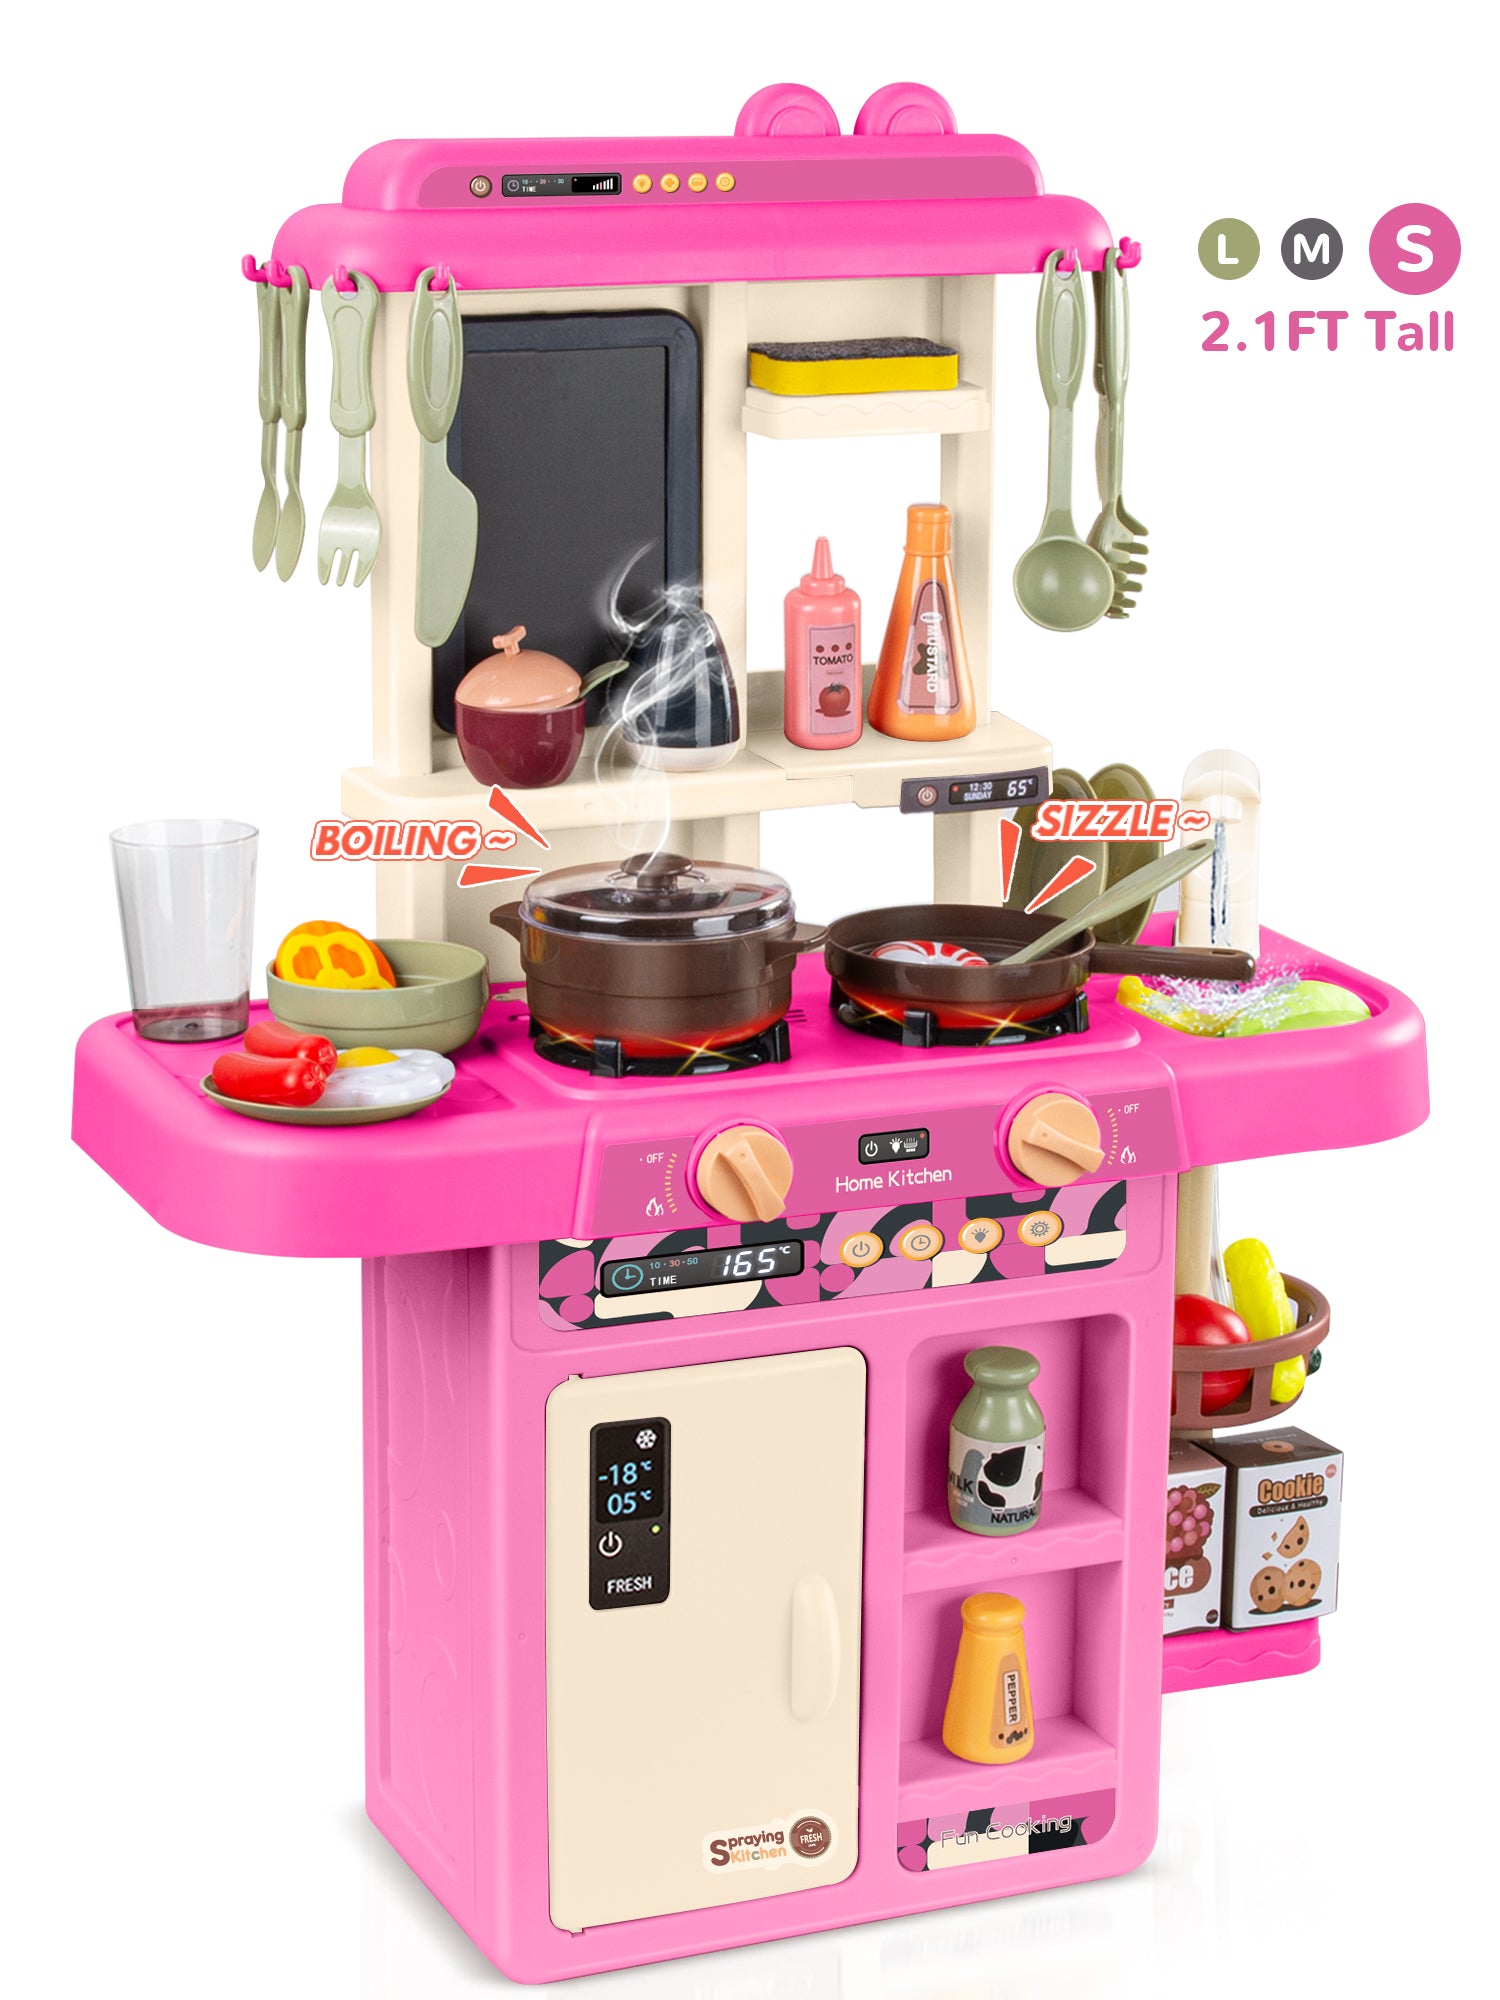 Wisairt Play Kitchen Set for Kids, 2.4FT Tall Kids Play Kitchen